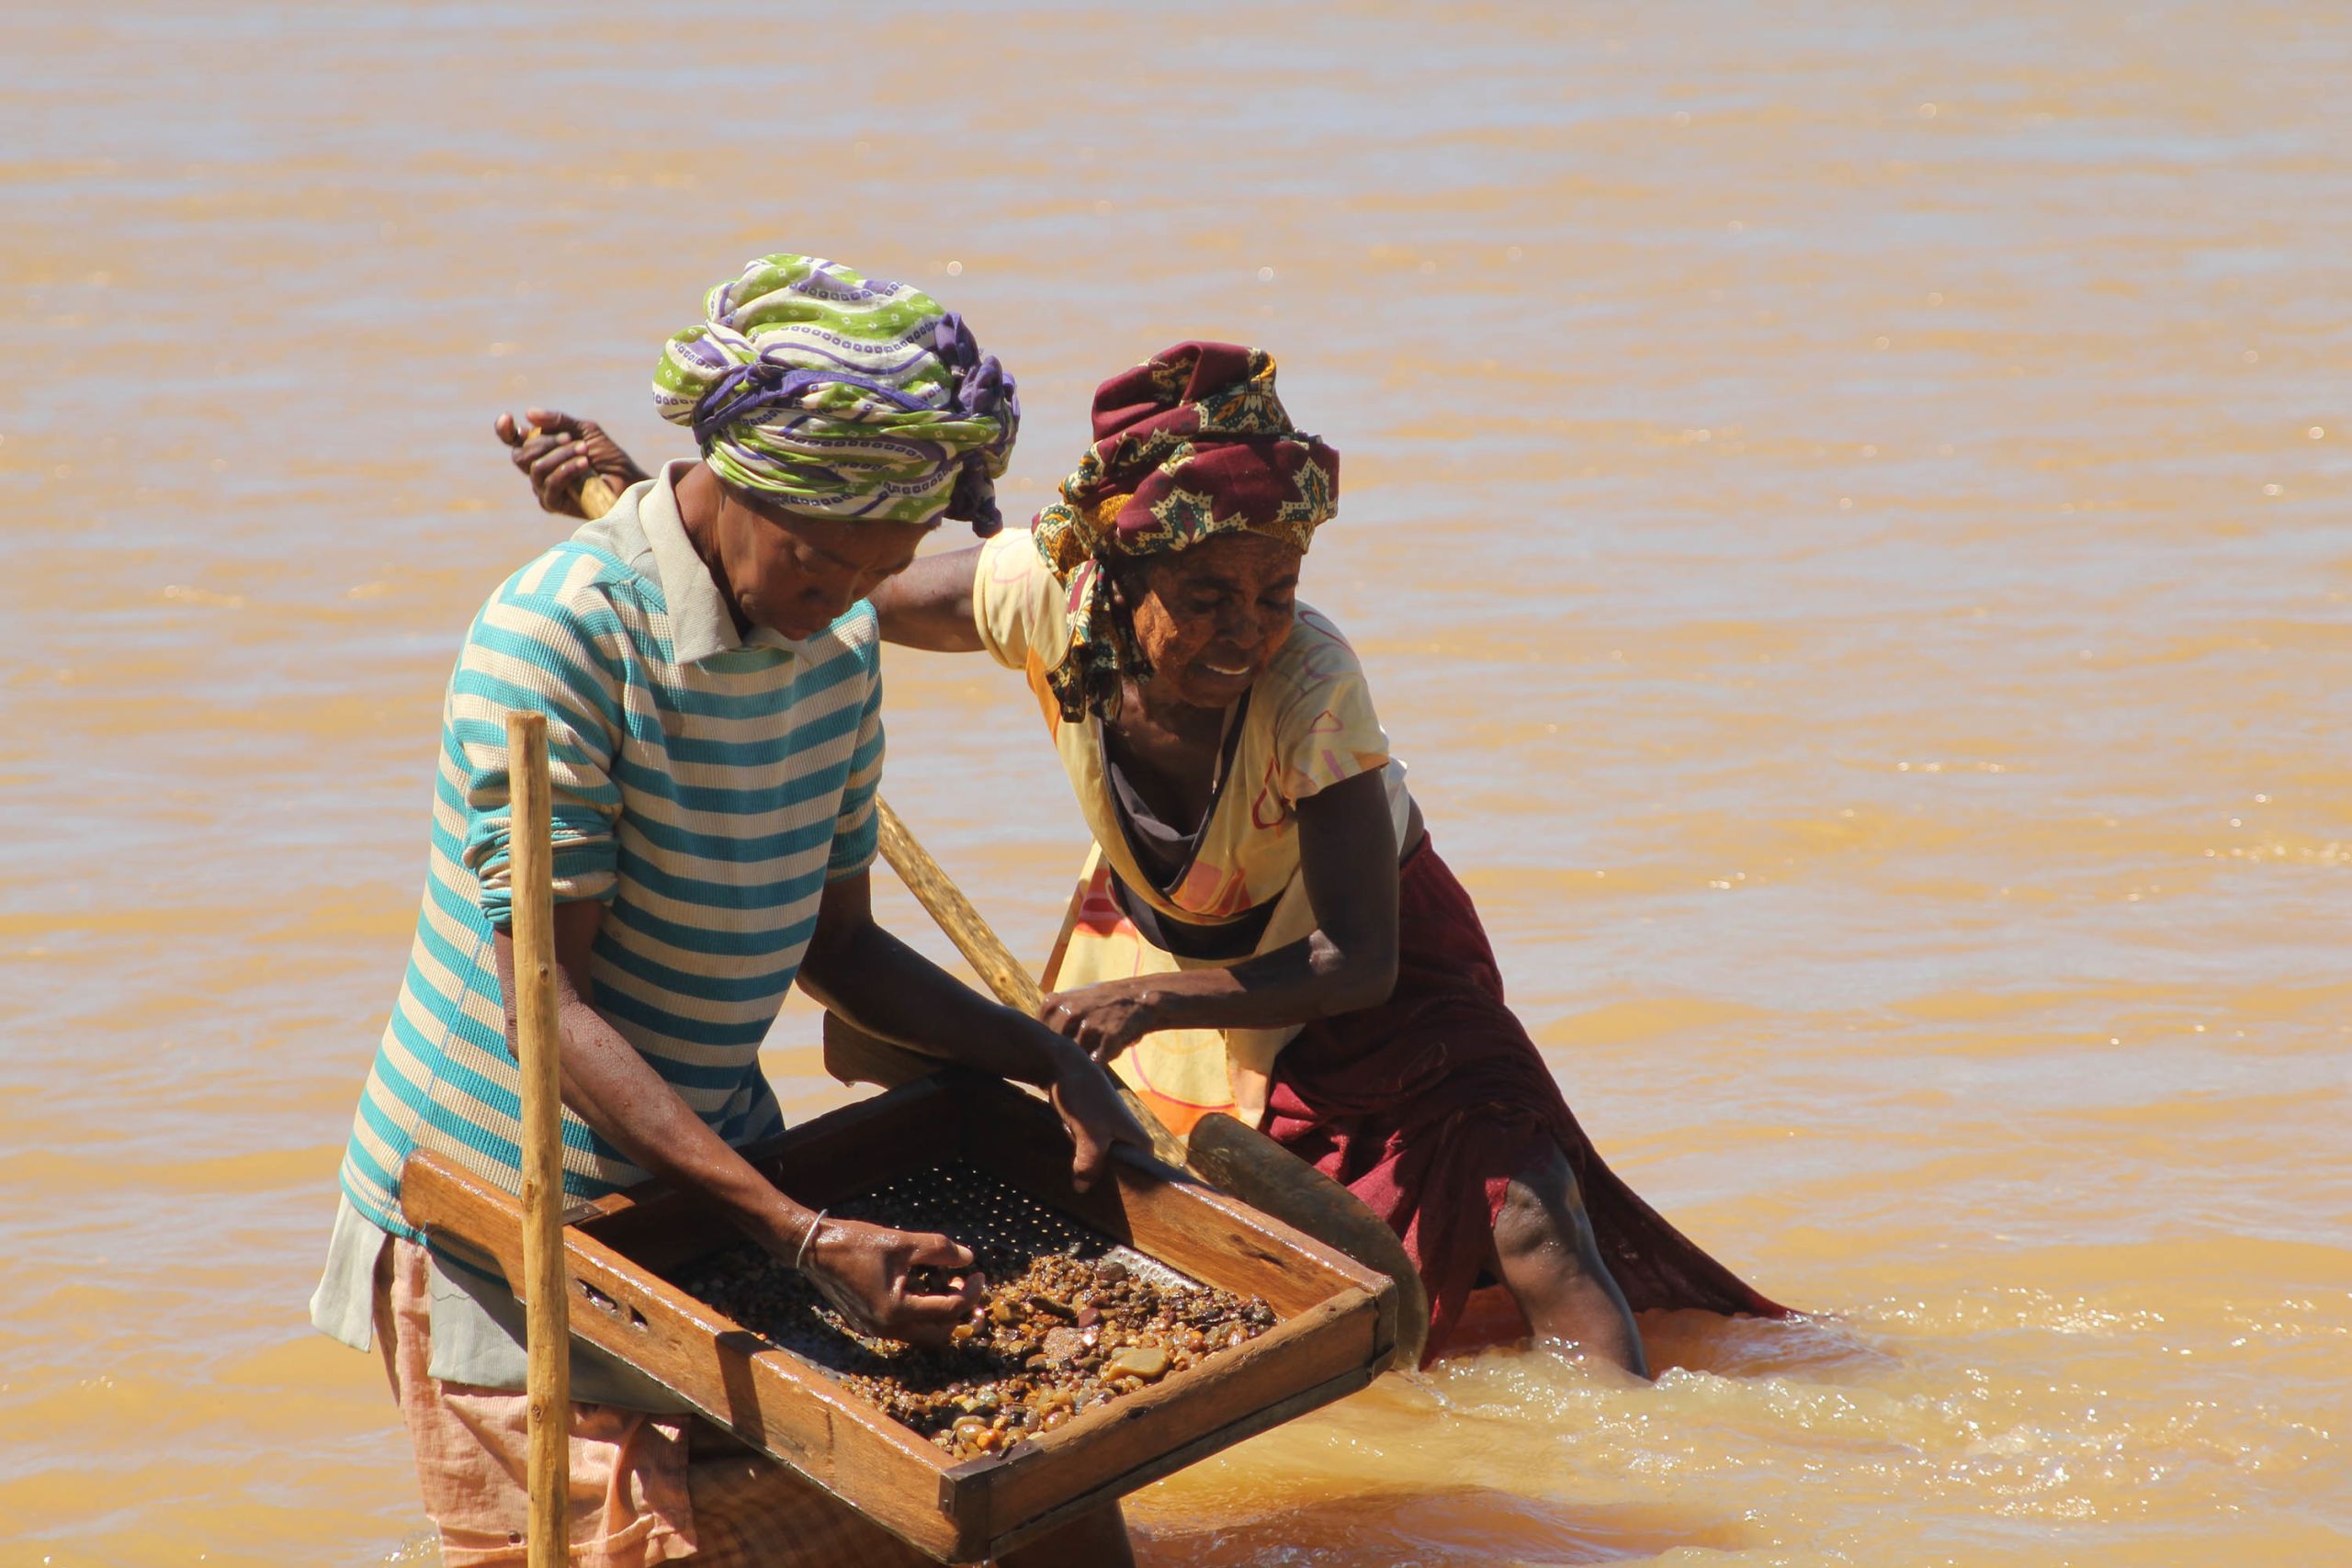 Malagasy women sieving for sapphires